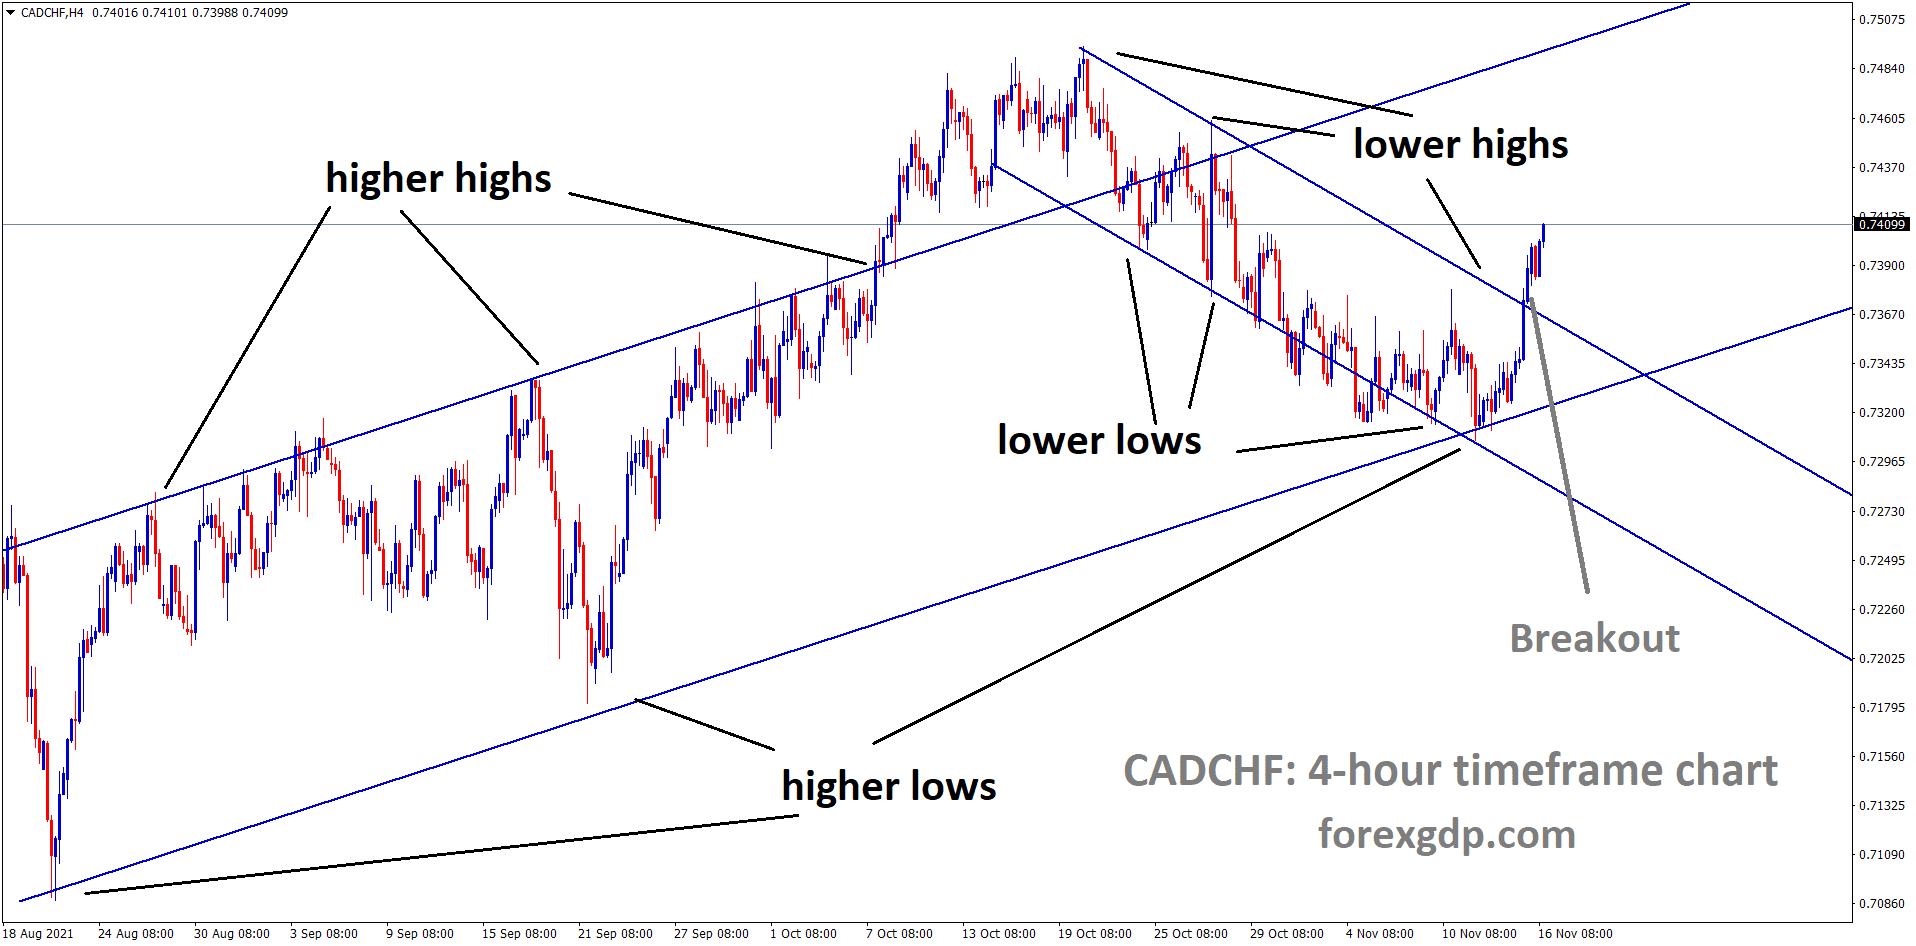 CADCHF has broken the Descending channel and market going on higher high